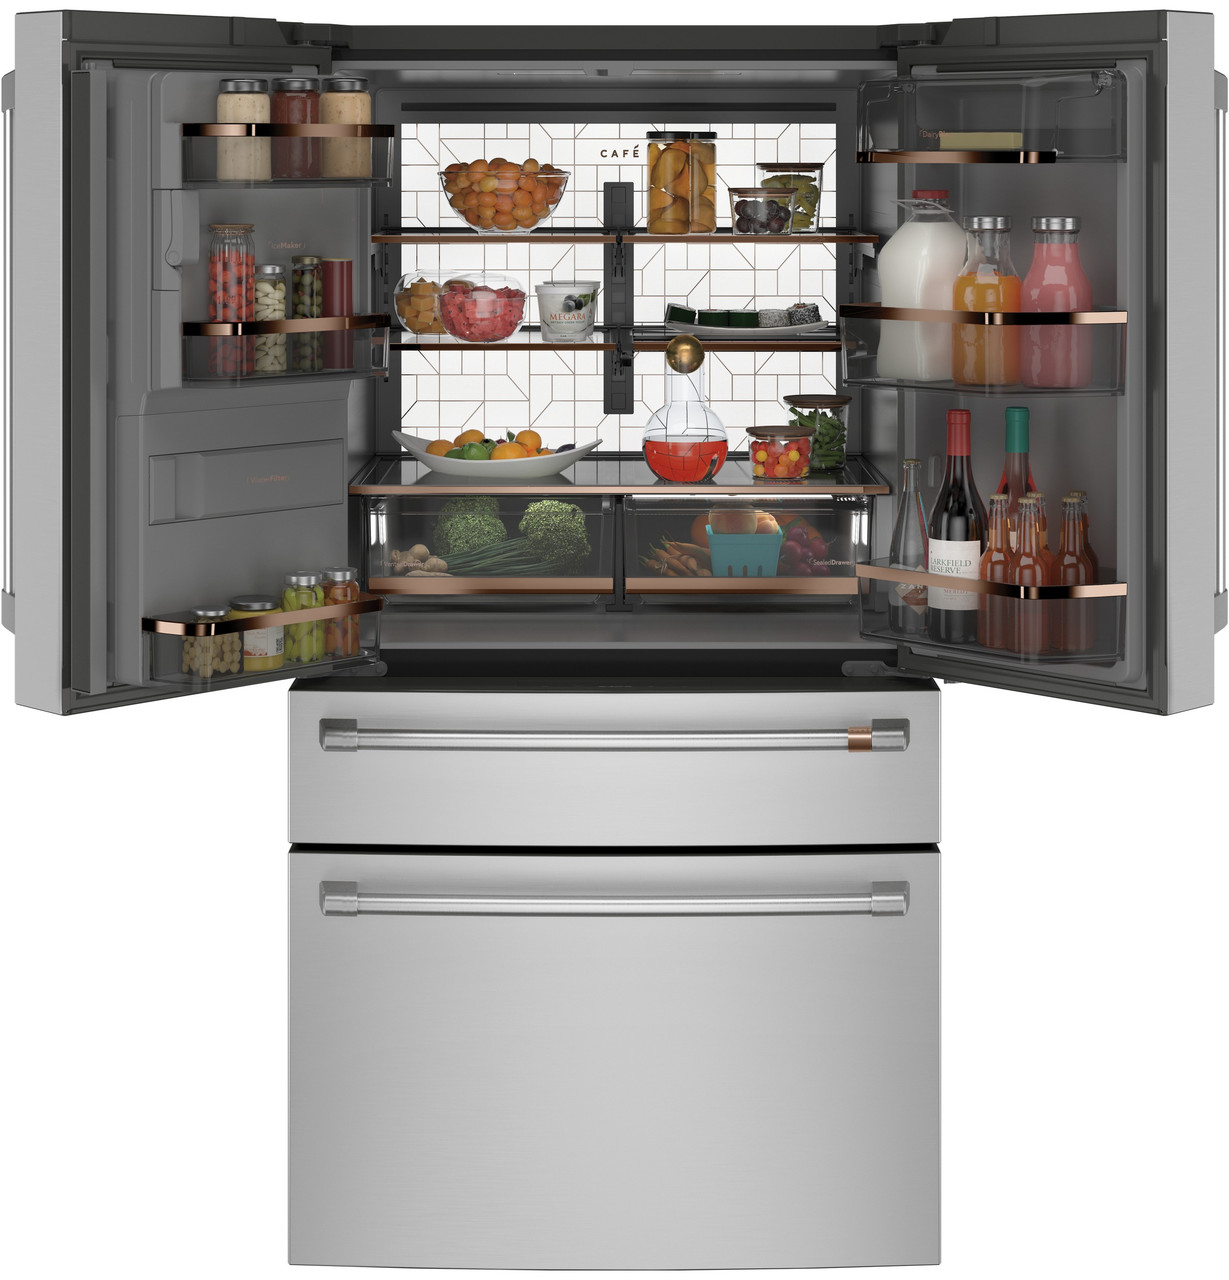 GE Profile™ Series ENERGY STAR® 25.3 Cu. Ft. Side-by-Side